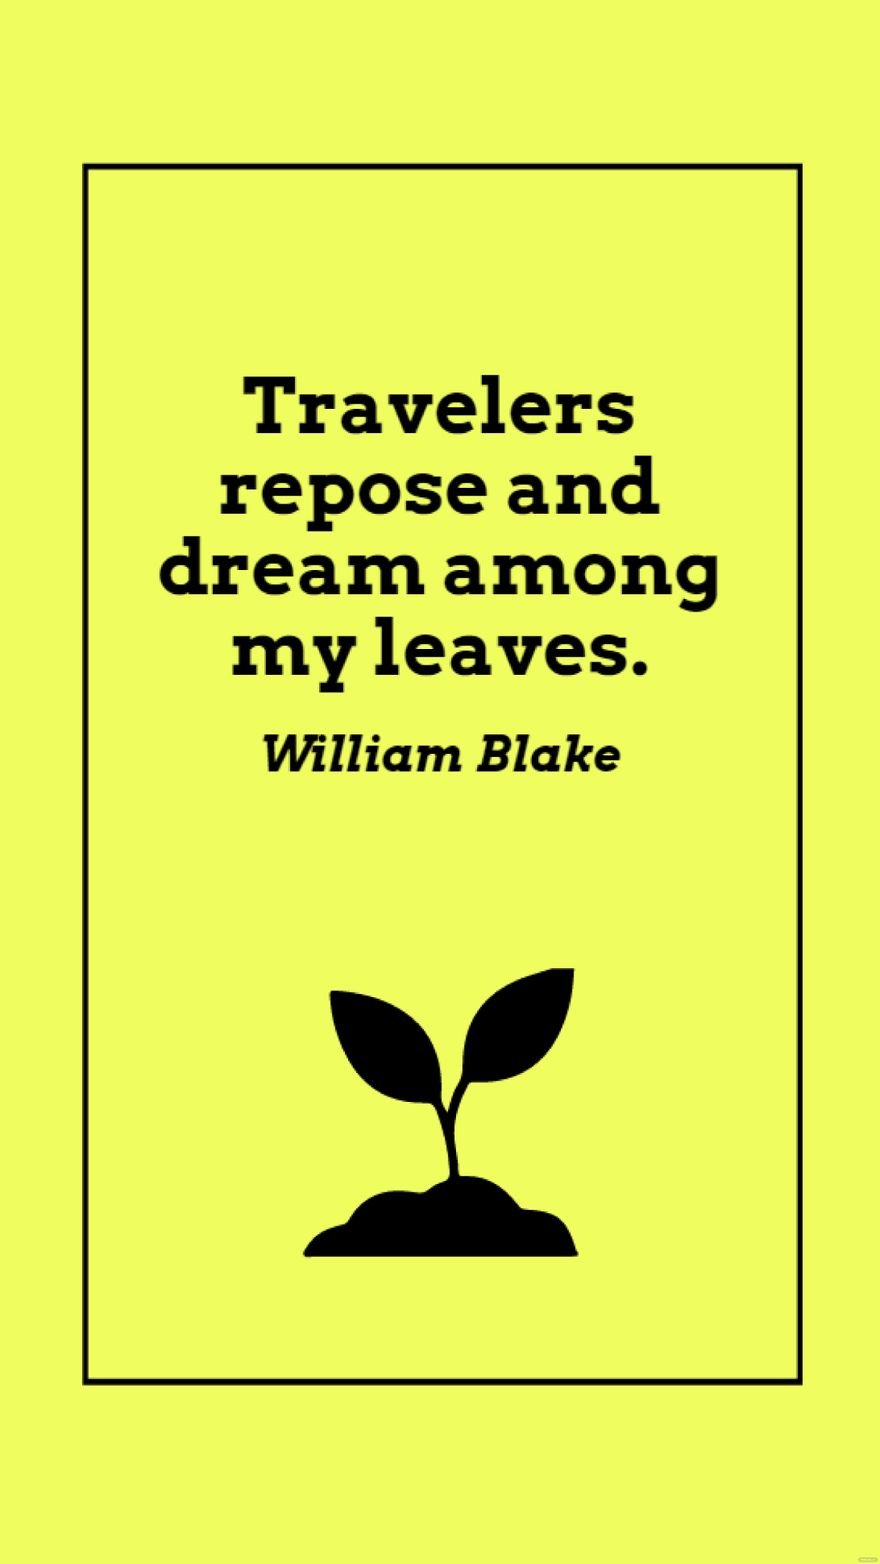 William Blake - Travelers repose and dream among my leaves.